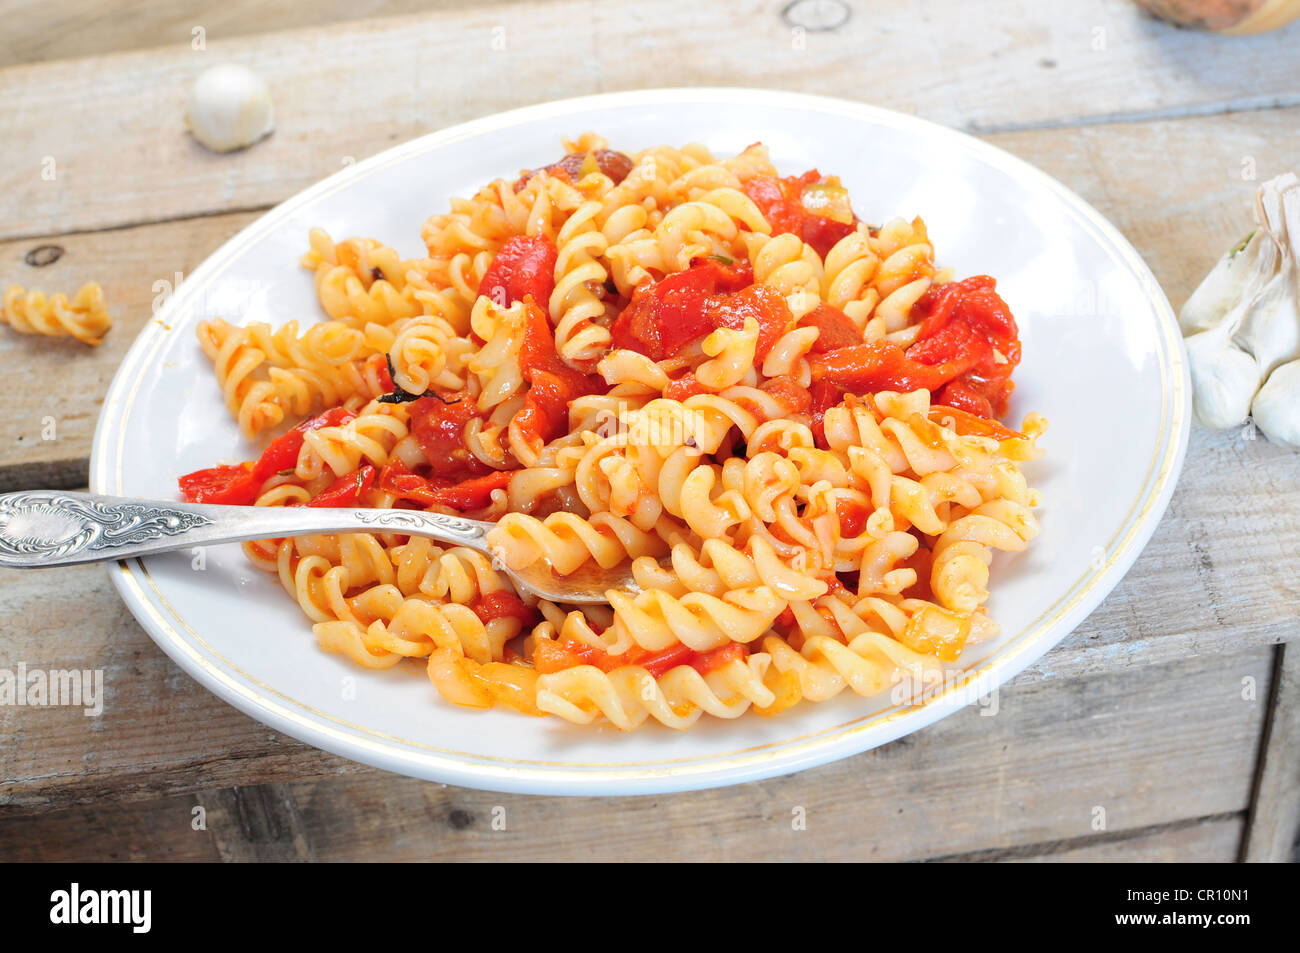 Pasta dish - cooked fusili with tomato and pepper sauce Stock Photo